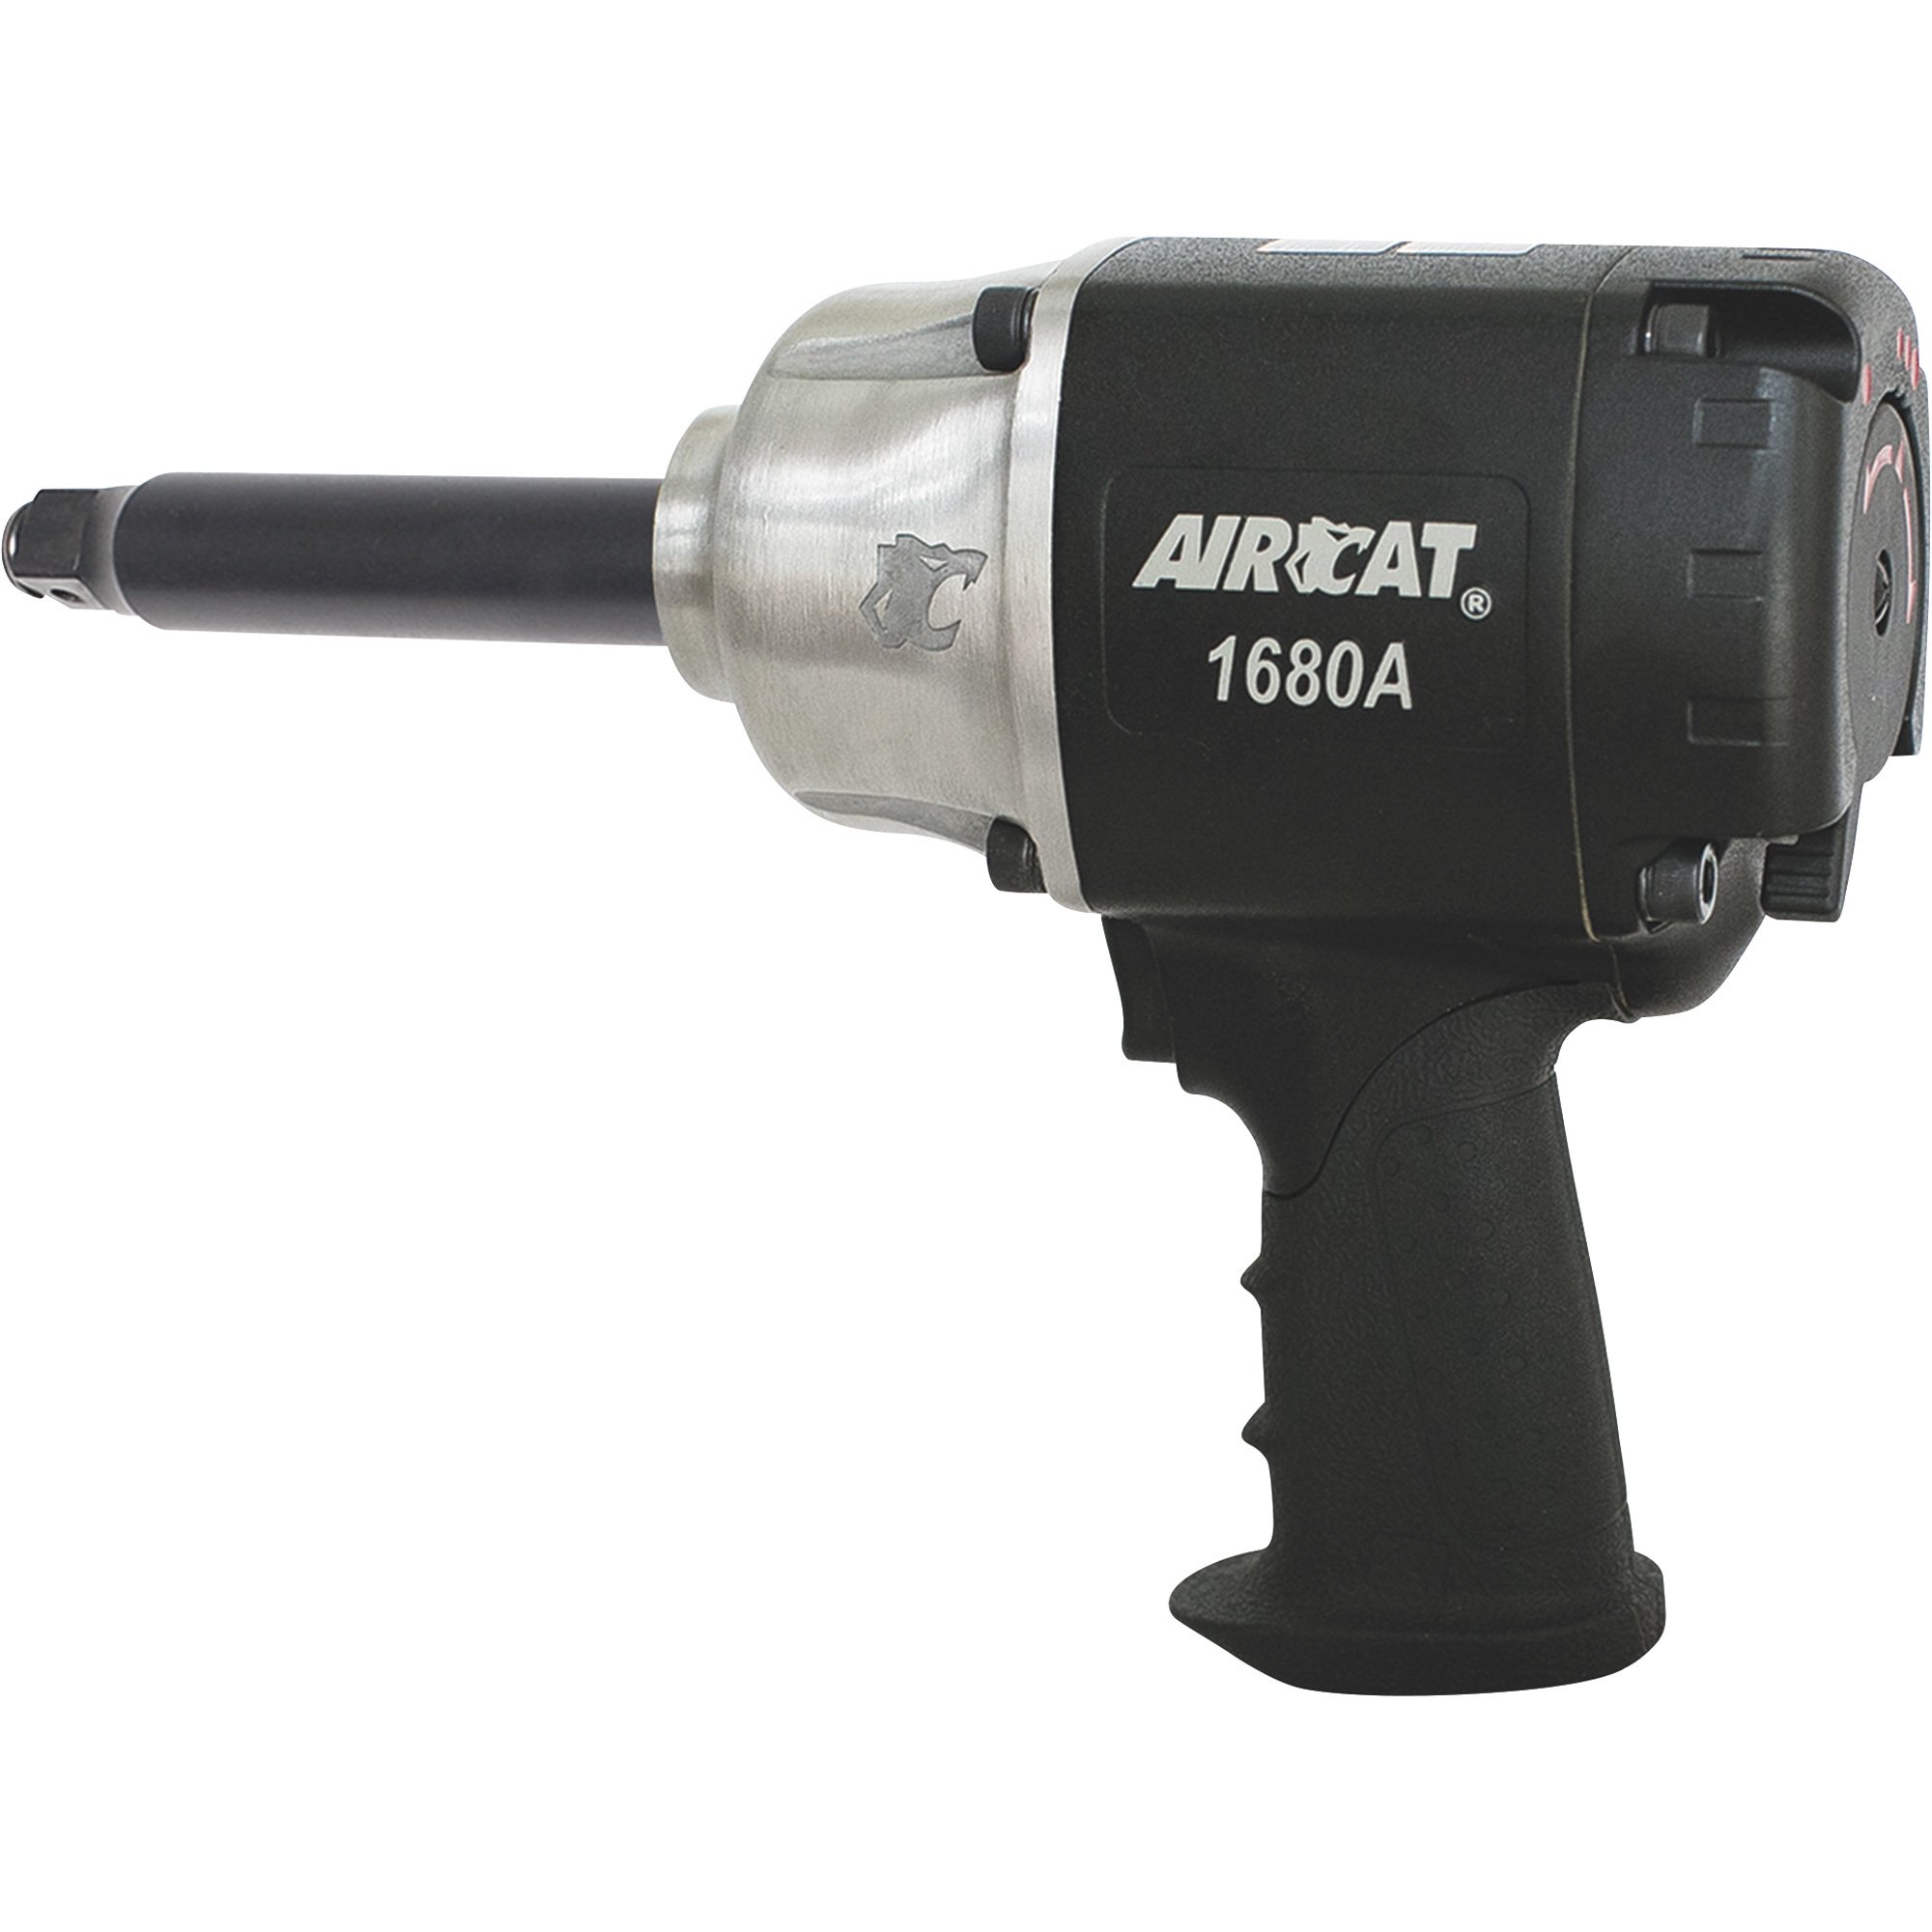 3/4" IMPACT WRENCH WITH 6” EXTENDED ANVIL